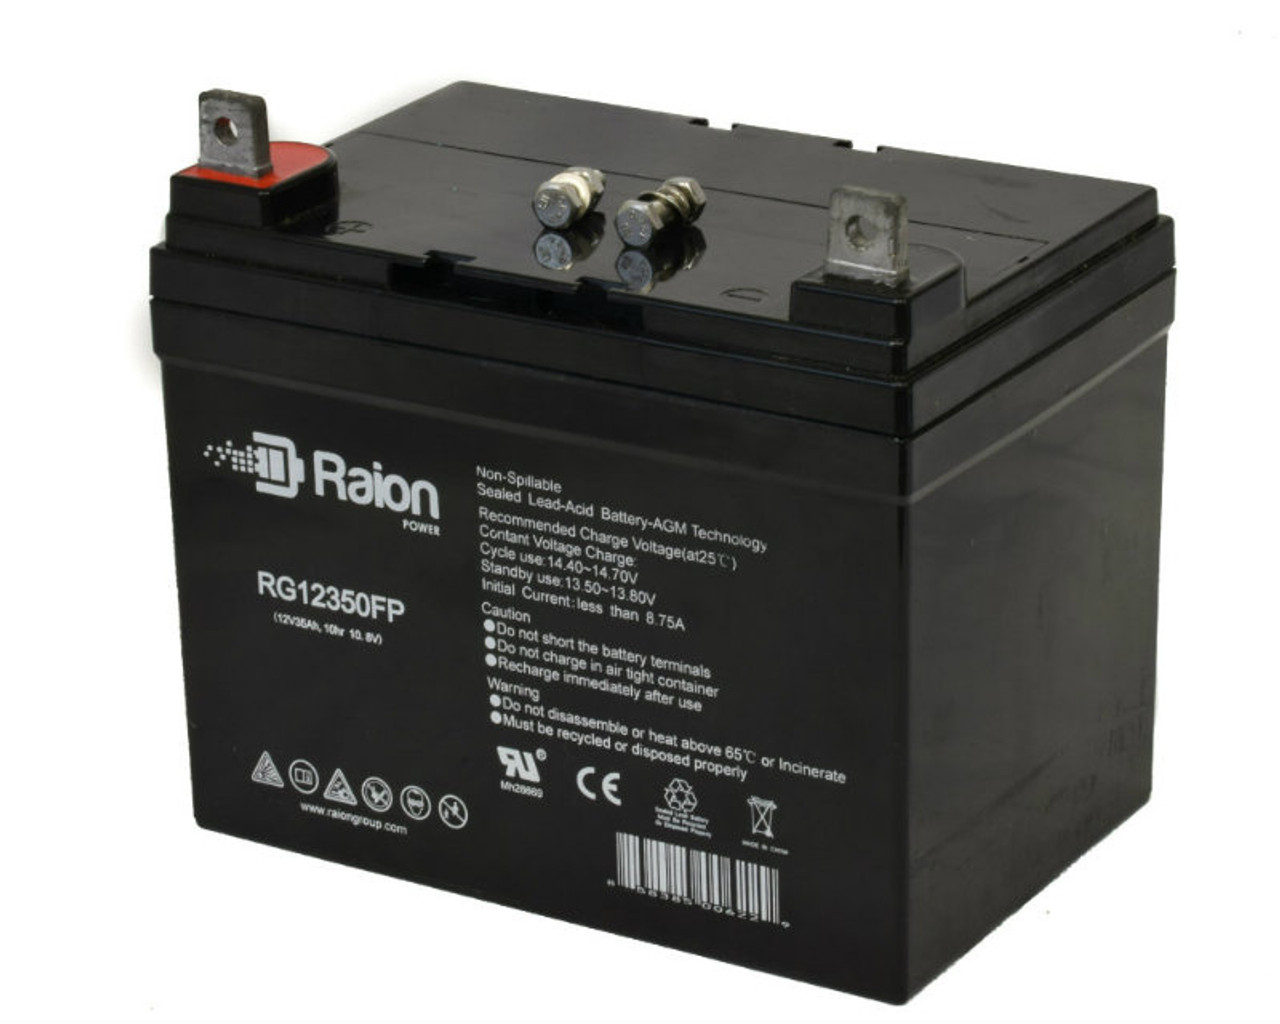 Raion Power Replacement 12V 35Ah RG12350FP Mobility Scooter Battery for IMC Heartway Mystere PF5